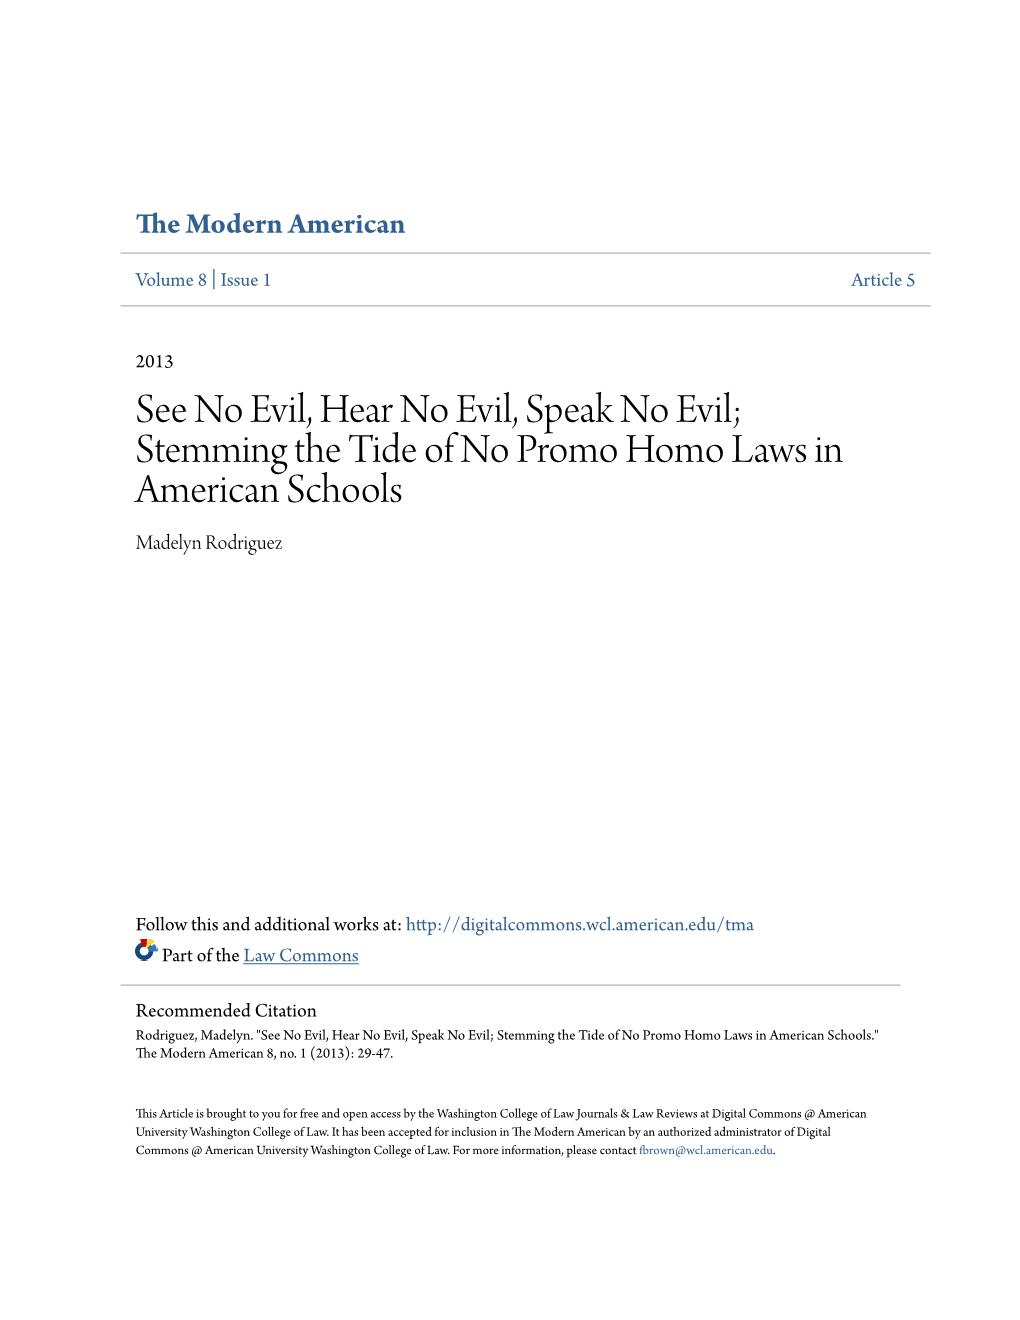 Stemming the Tide of No Promo Homo Laws in American Schools Madelyn Rodriguez